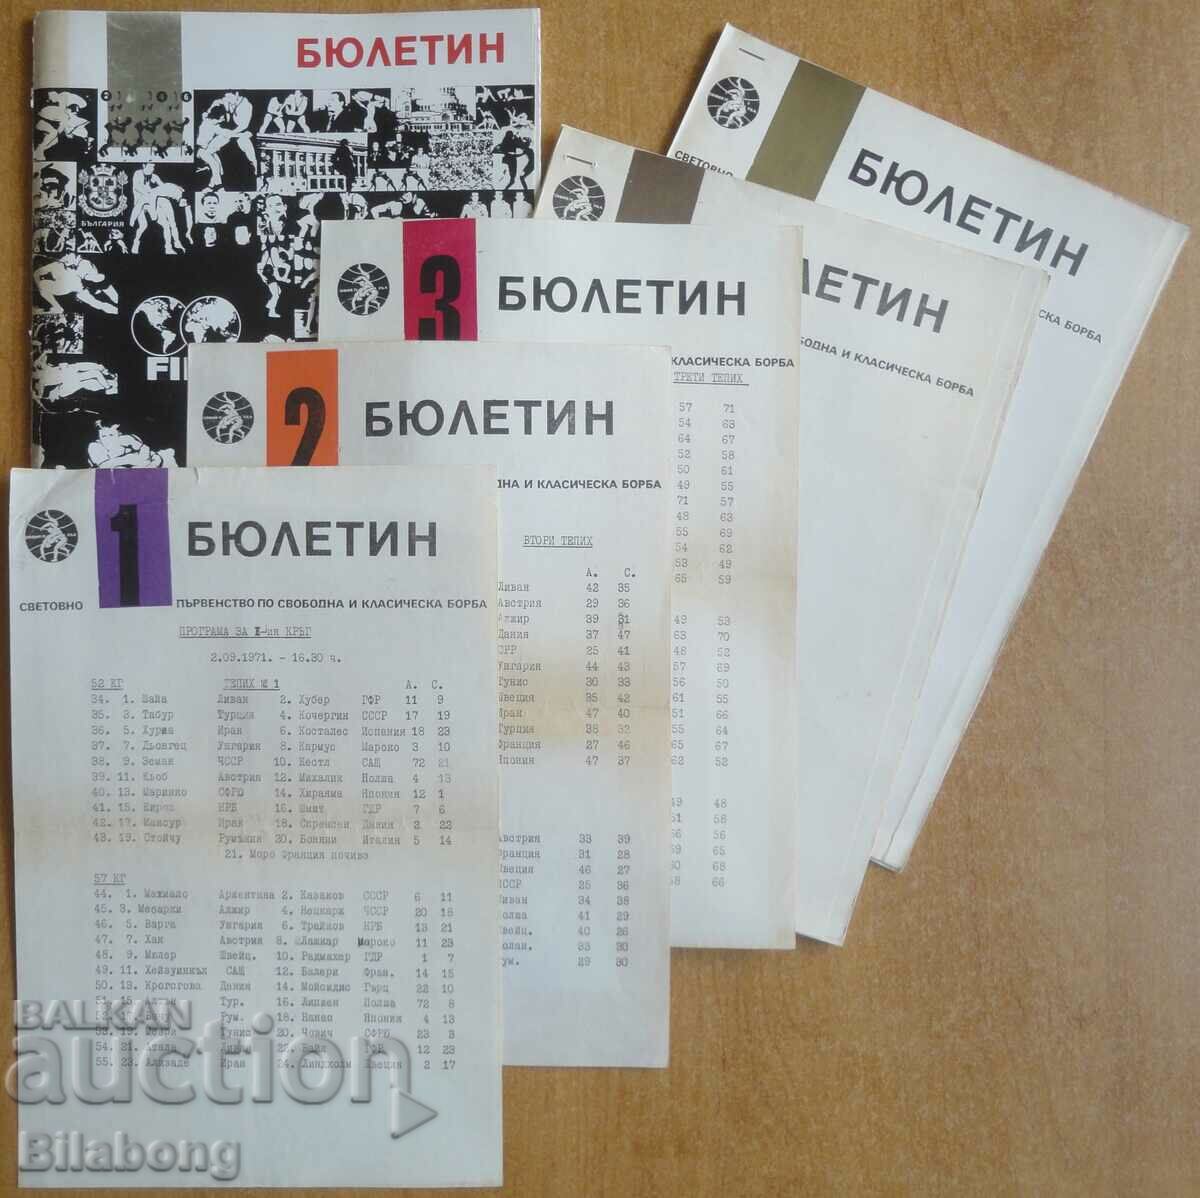 Documents for the World Wrestling Championship in Sofia 1971.